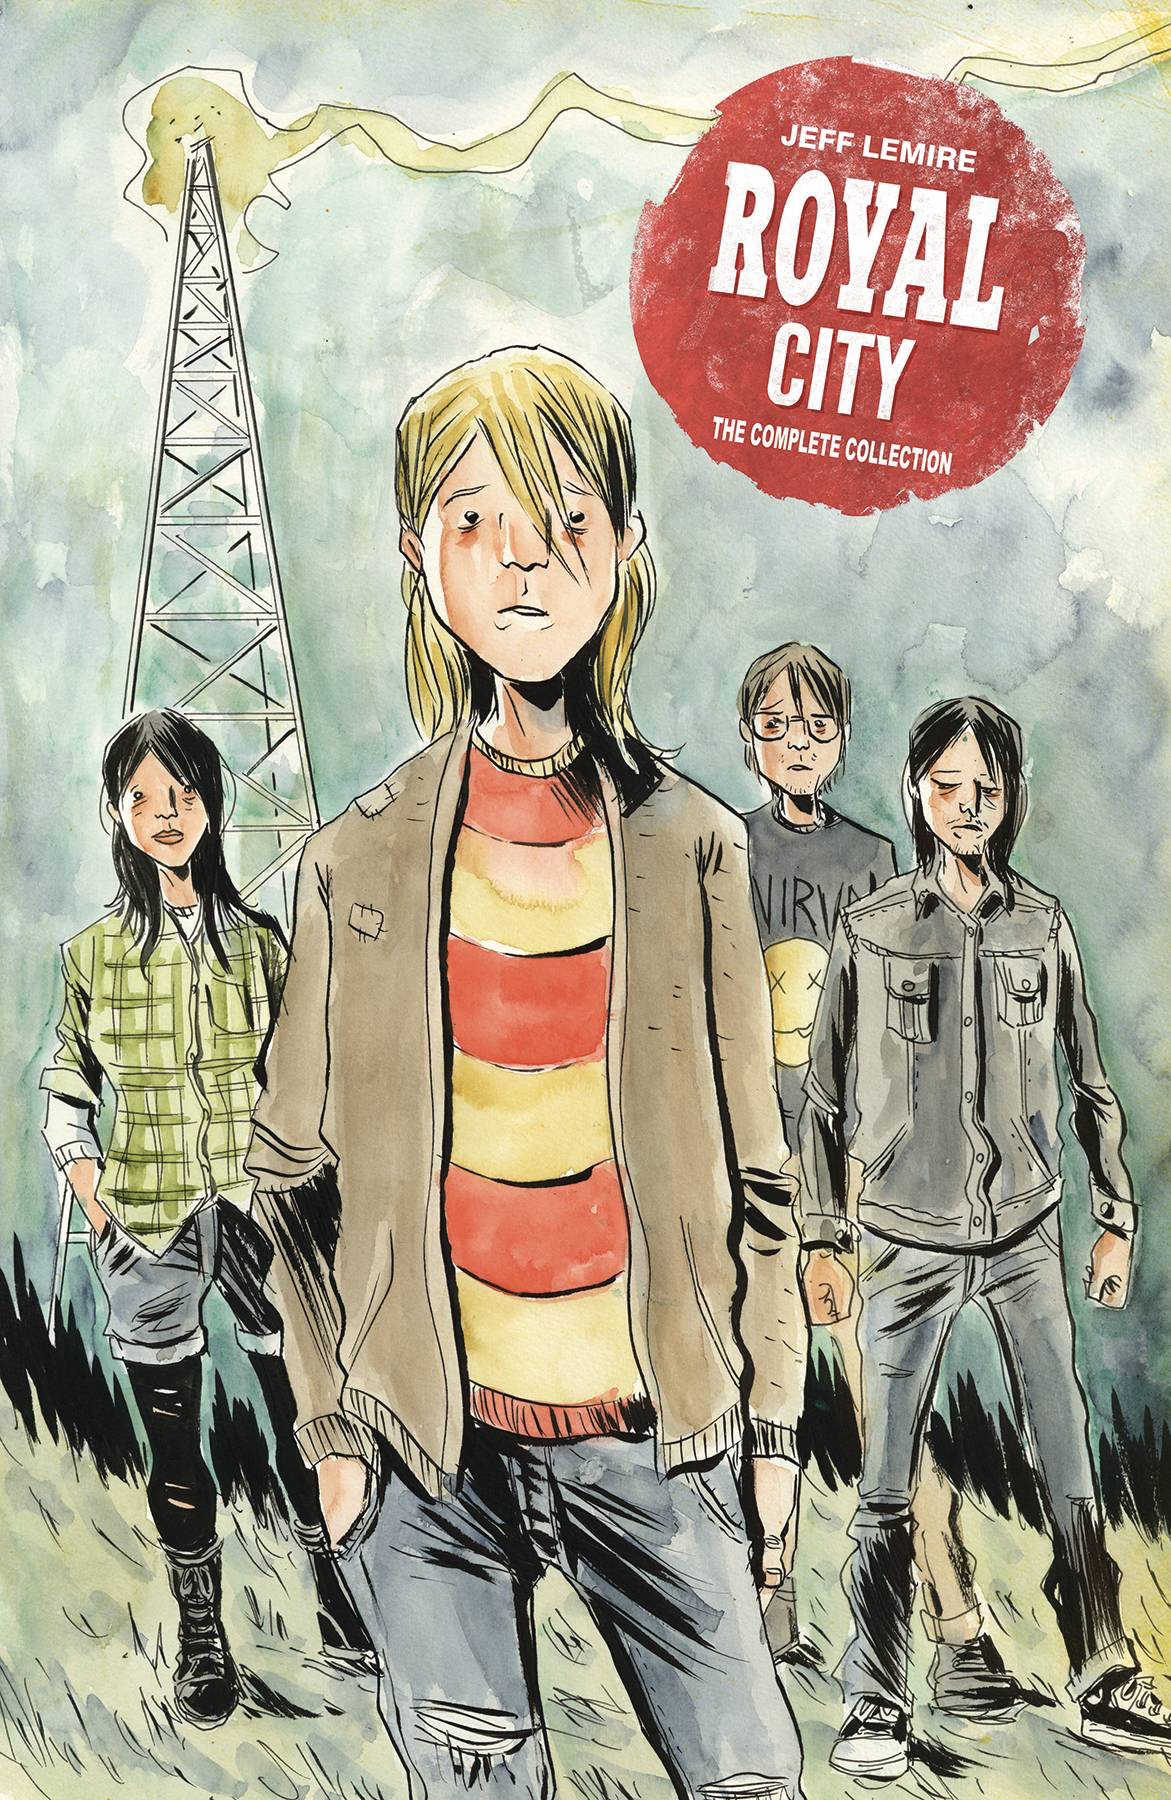 Royal City (2017) Volume 1 - The Complete Collection HC